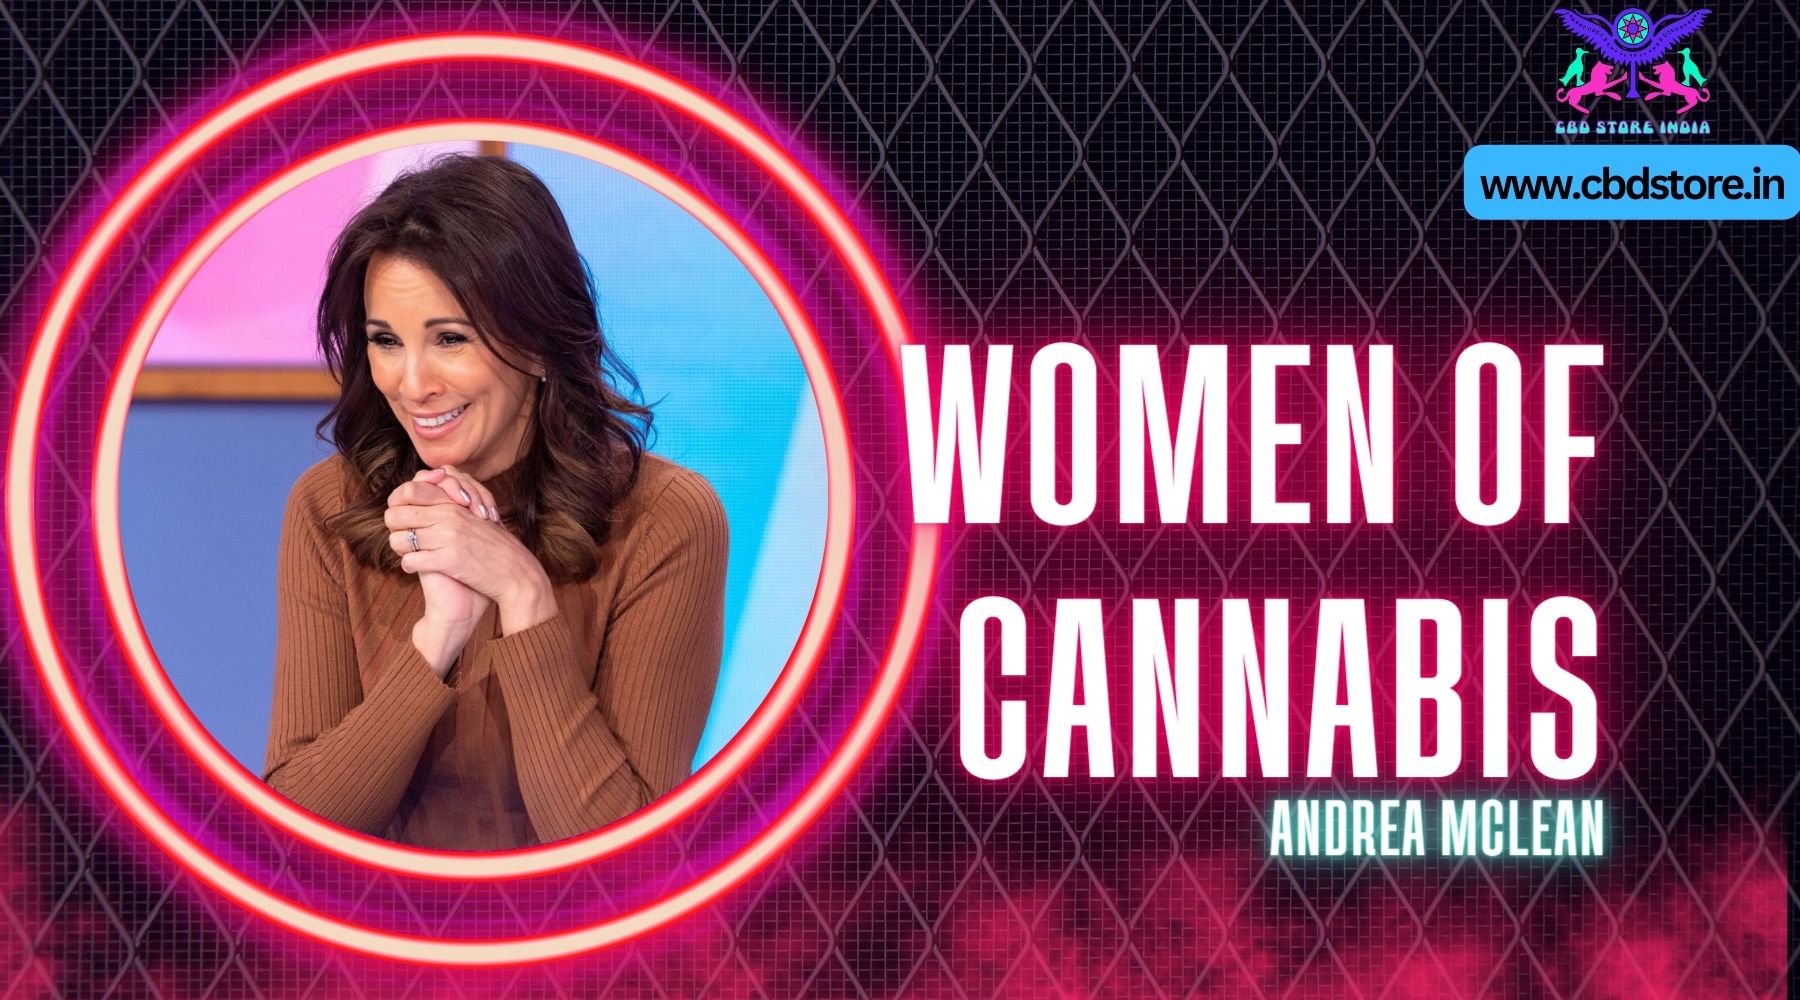 Women of Cannabis: How Andrea McLean dealt with menopause using CBD! - CBD Store India